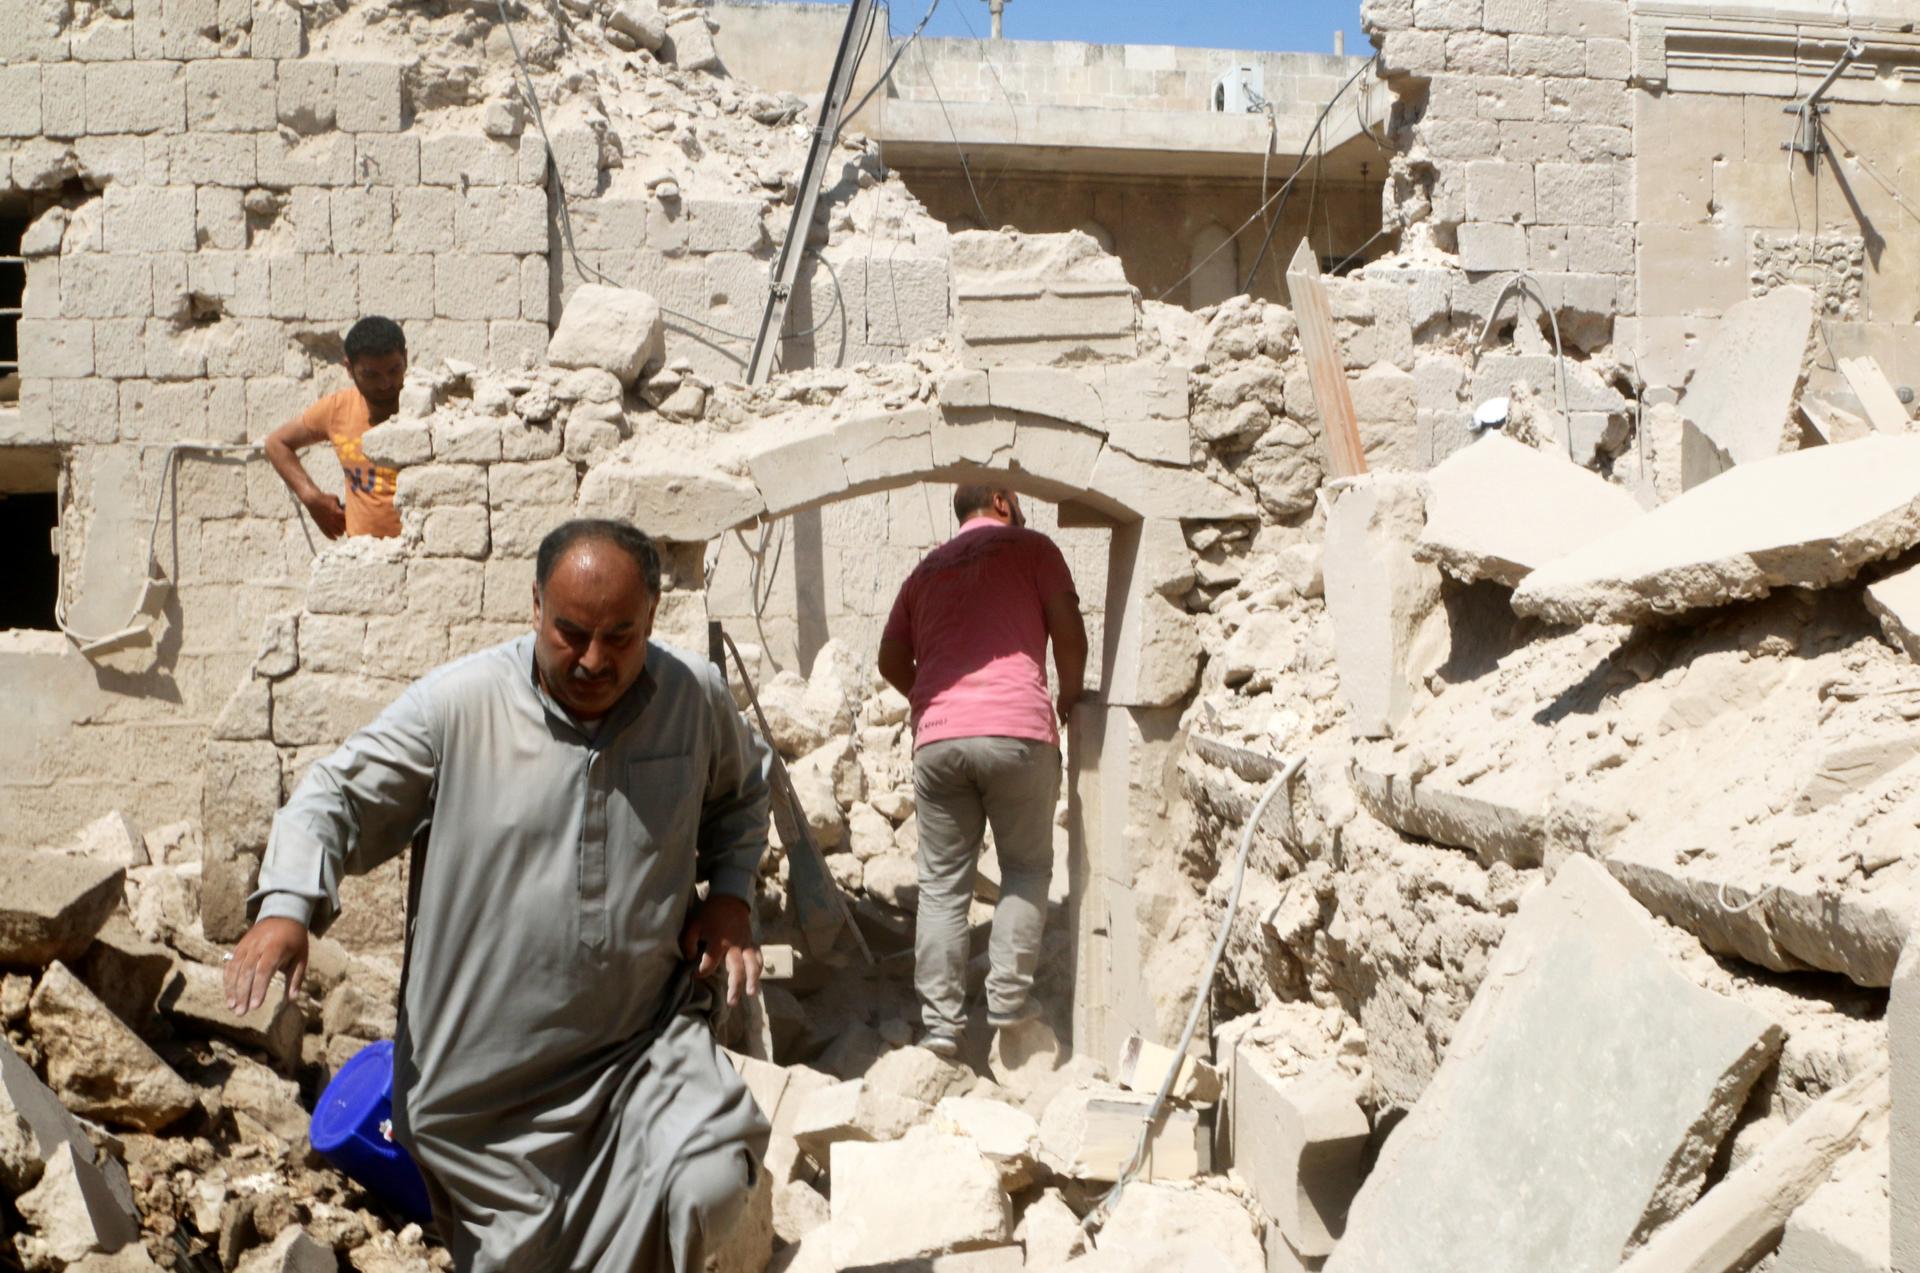 Residents inspect their damaged homes after an airstrike on the rebel-held Old Aleppo, Syria on Aug. 15.